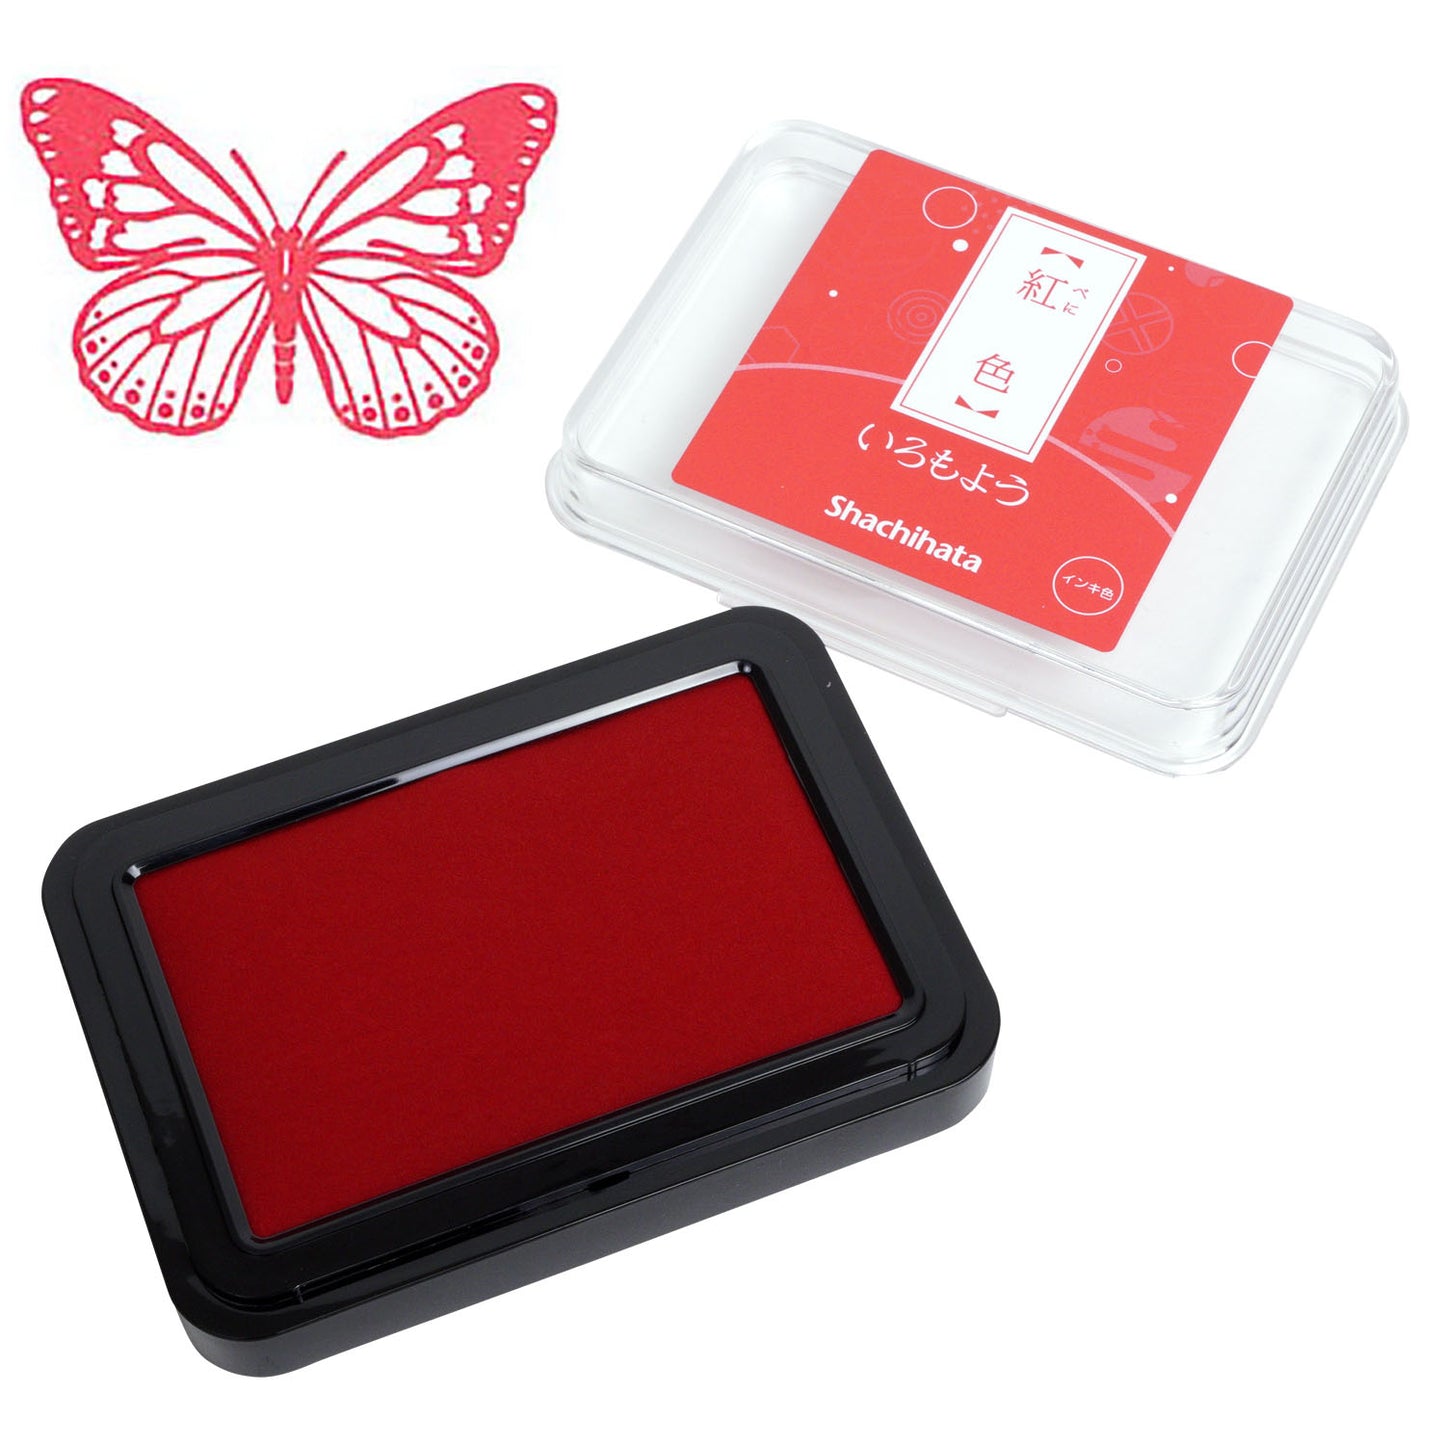 Red / Shachihata Iromoyo Oil-Based Ink Pad